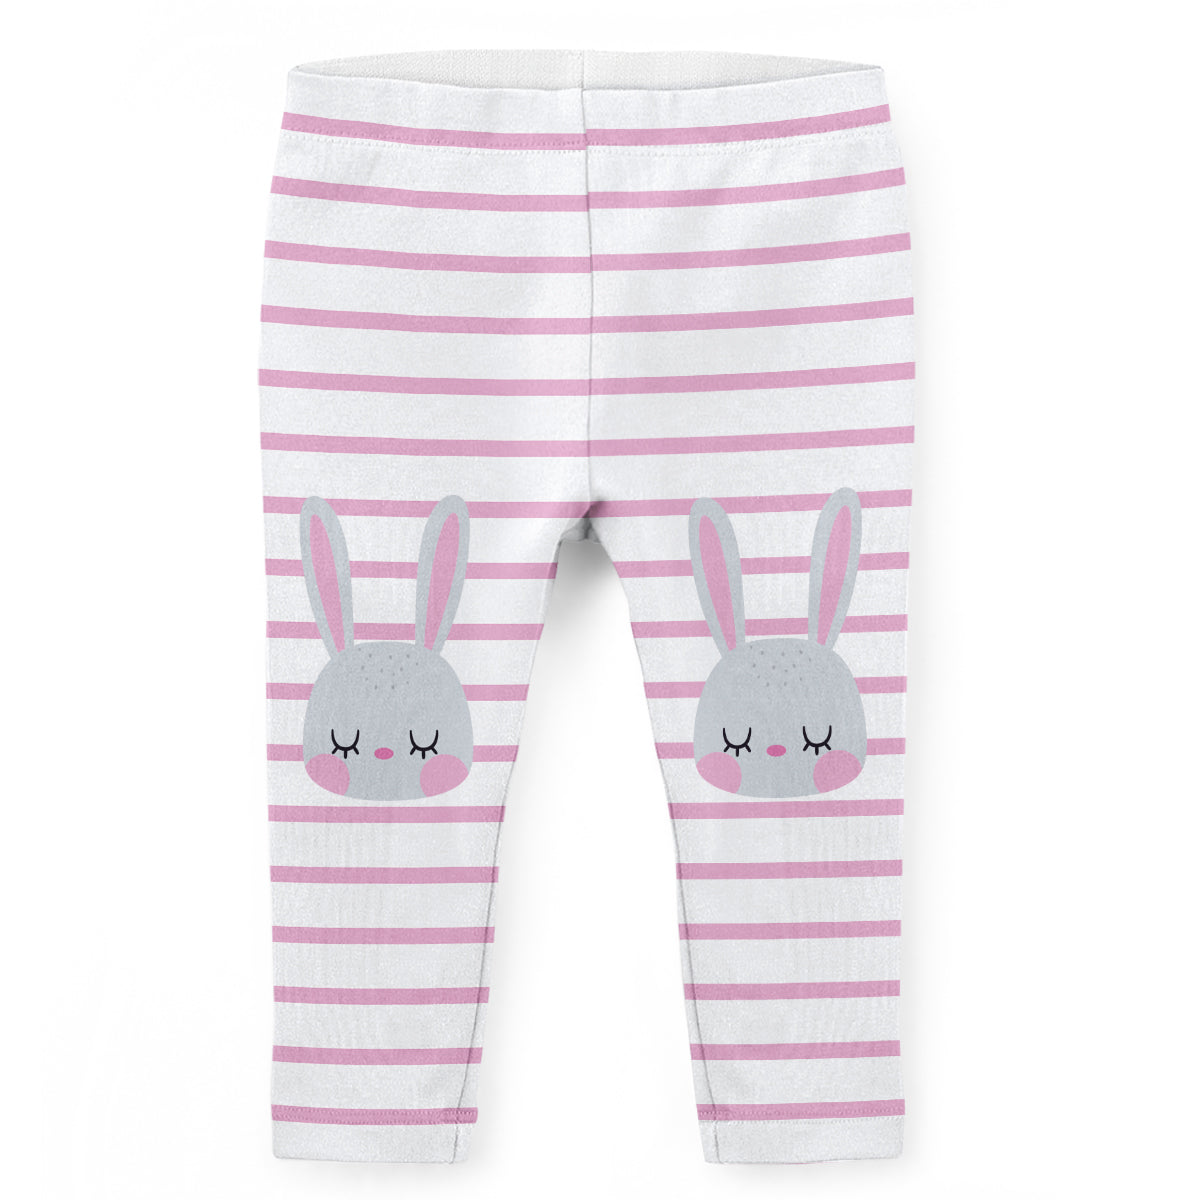 Bunnies White and Pink Stripes Leggings - Wimziy&Co.